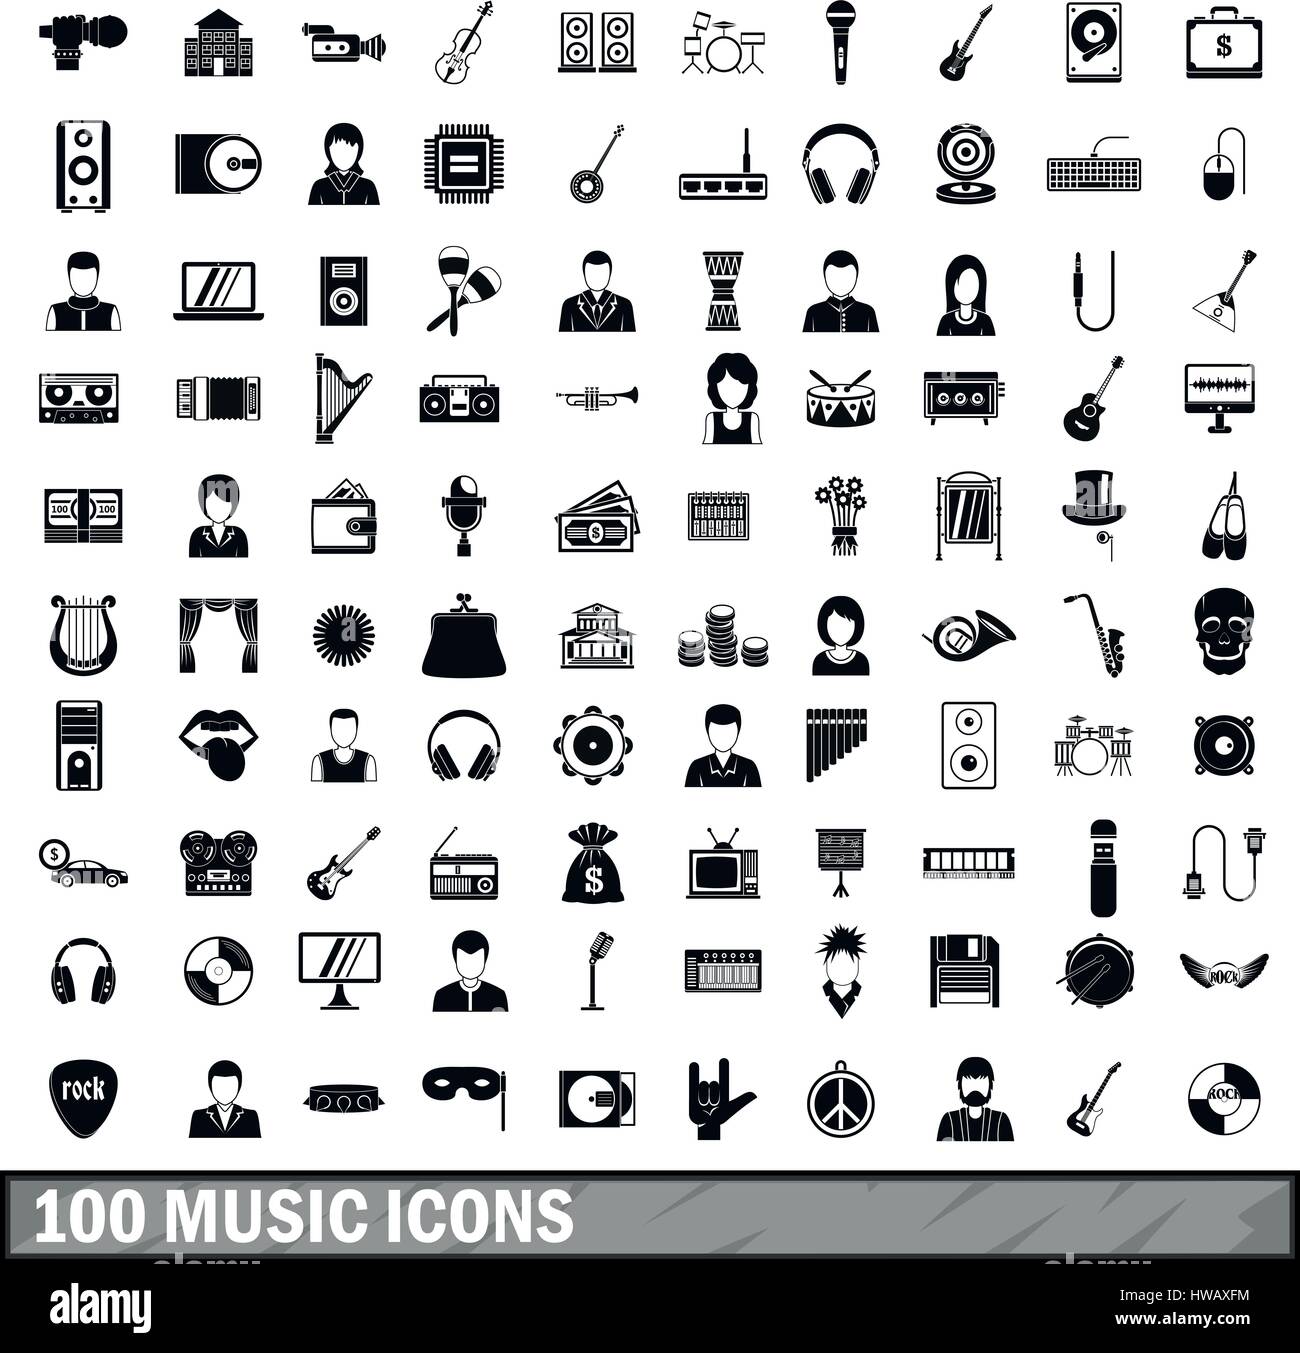 100 music icons set, simple style  Stock Vector